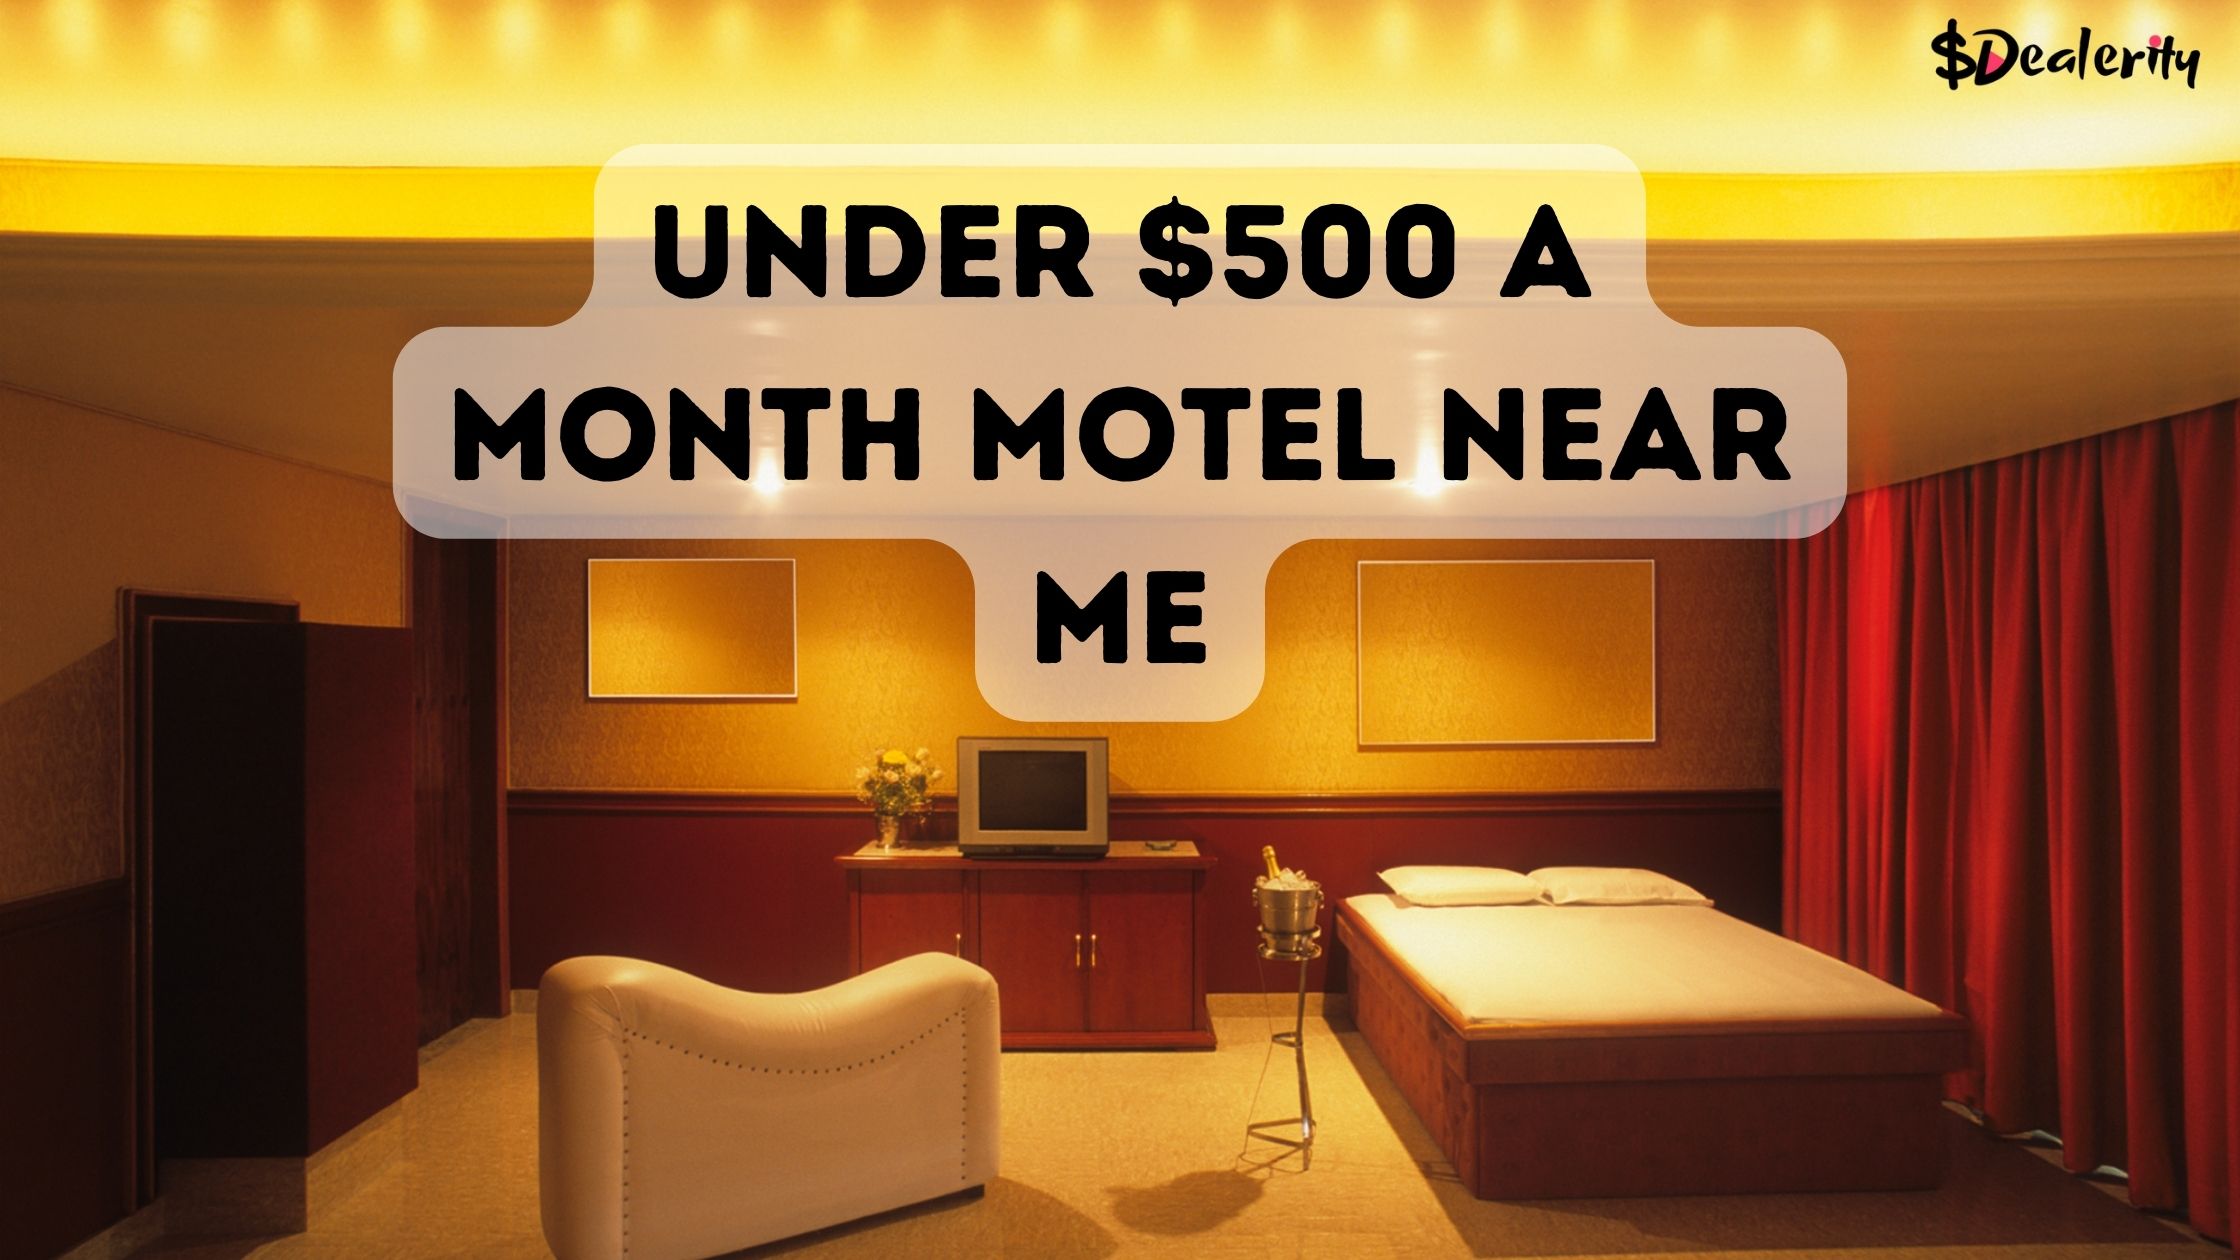 Under $500 A Month Motel Near Me Top 10 Cheap Motels with Monthly Rates Under $100 to $500